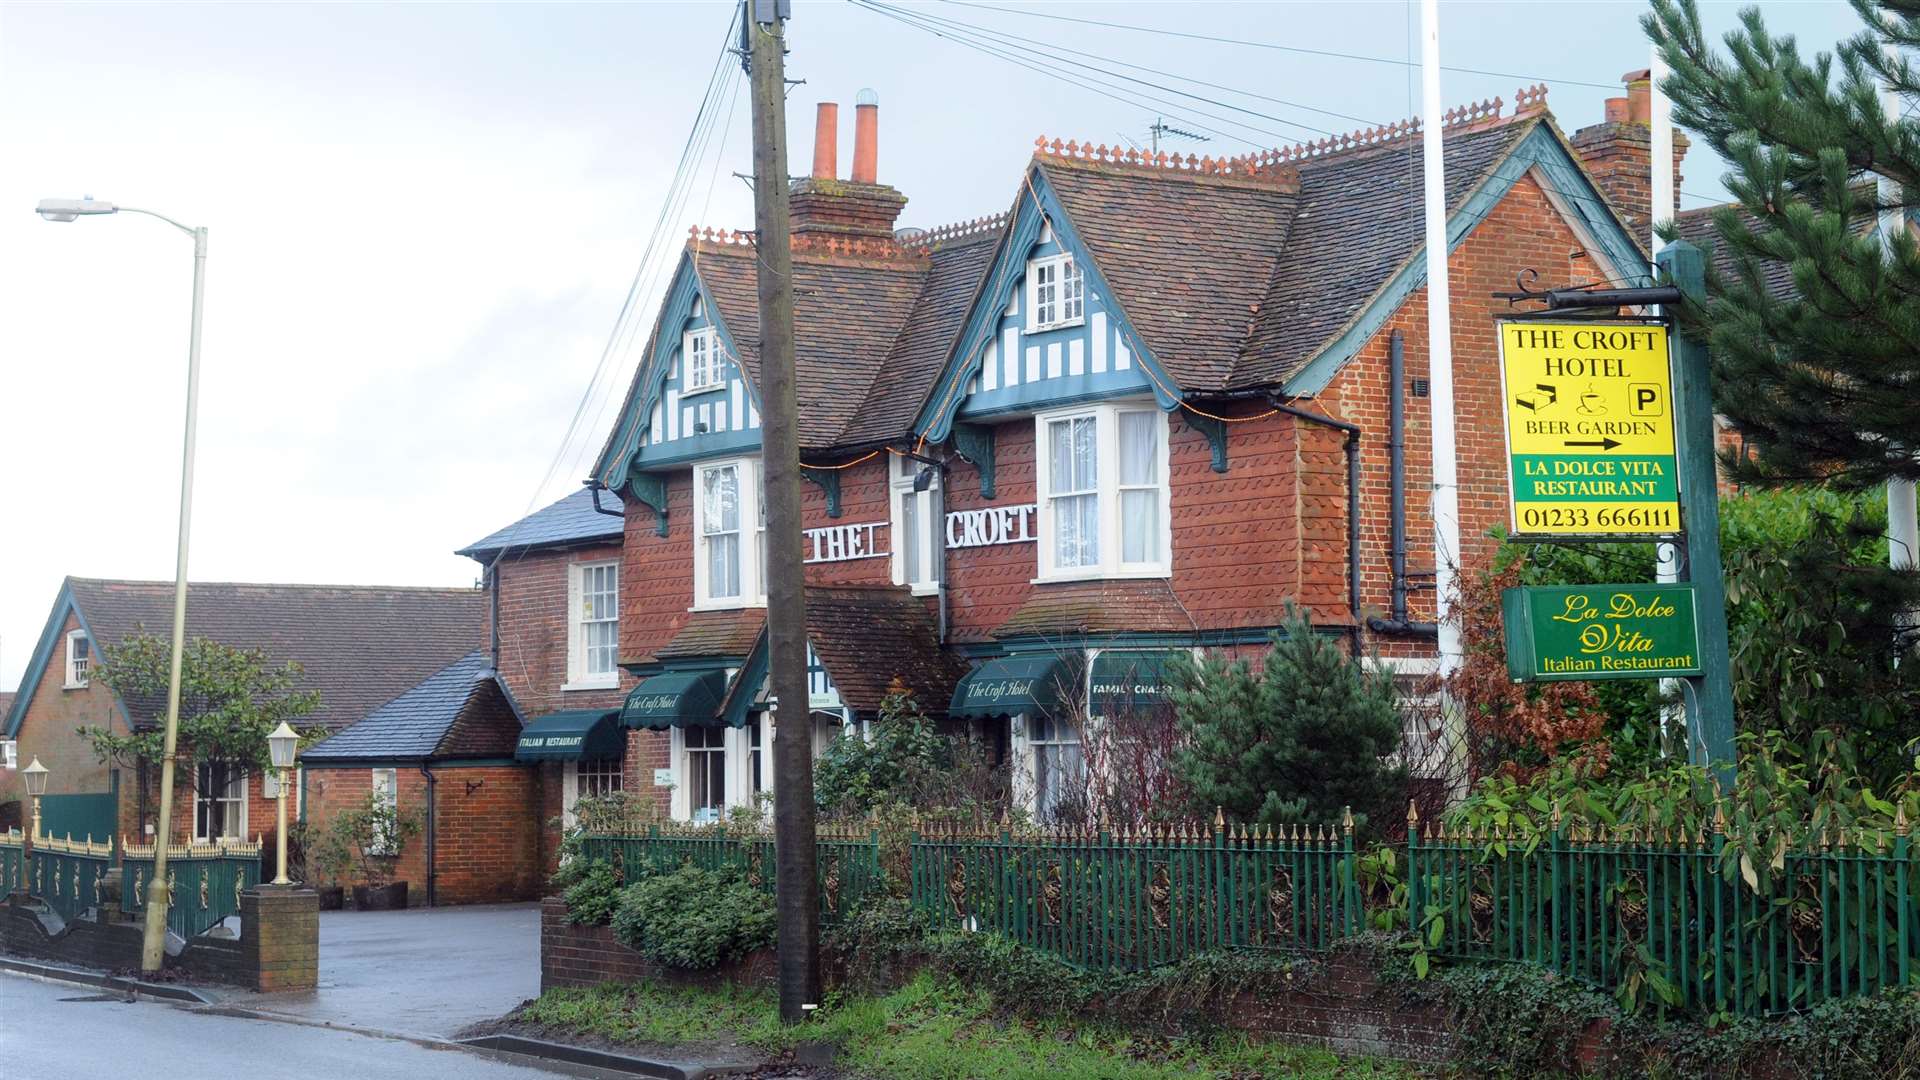 Plans to demolish The Croft hotel have been turned down